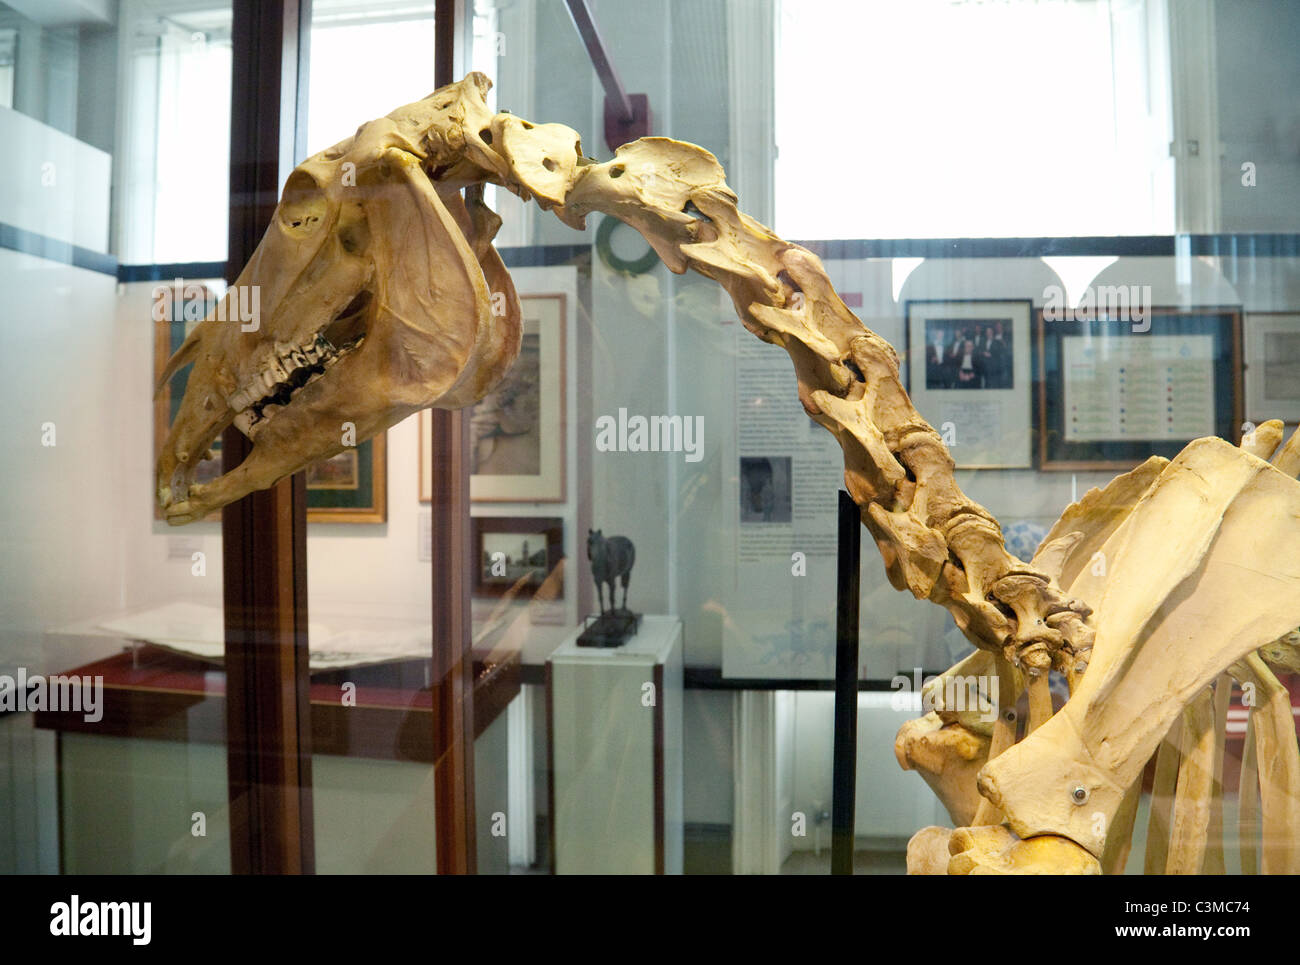 Skeleton of the famous racehorse 'Hyperion' in the National Horseracing Museum, Newmarket Suffolk Stock Photo